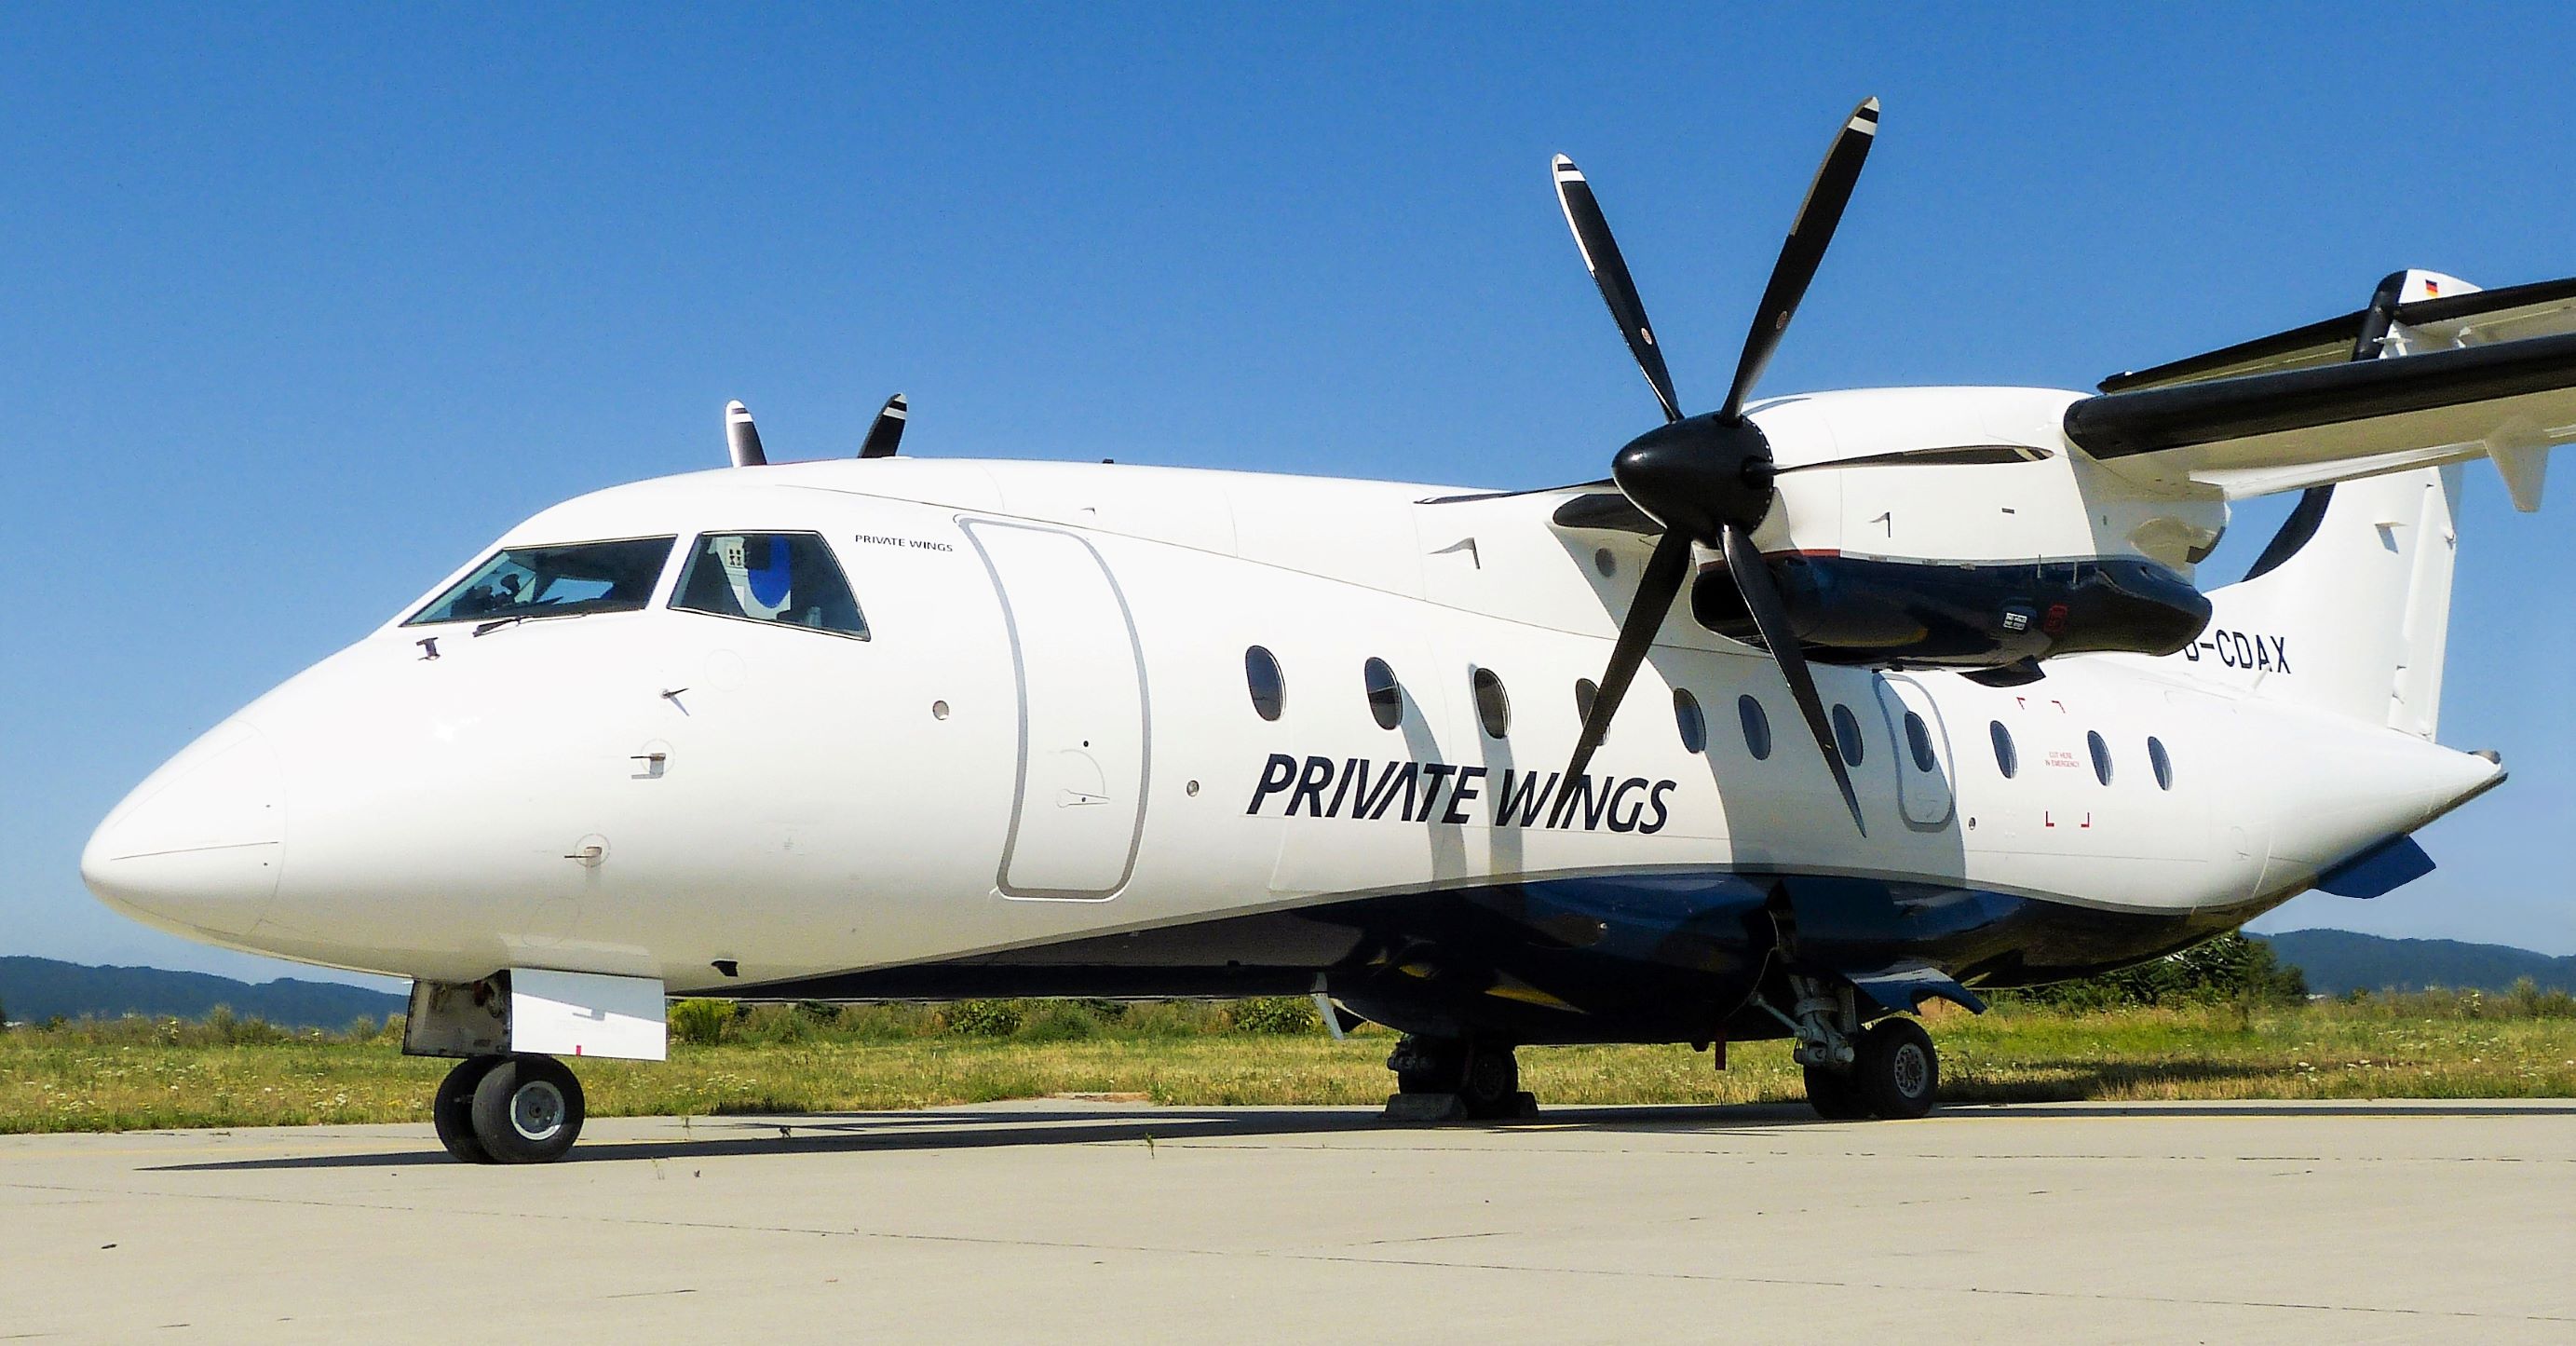 Private Wings Dornier 328-100 in the new livery